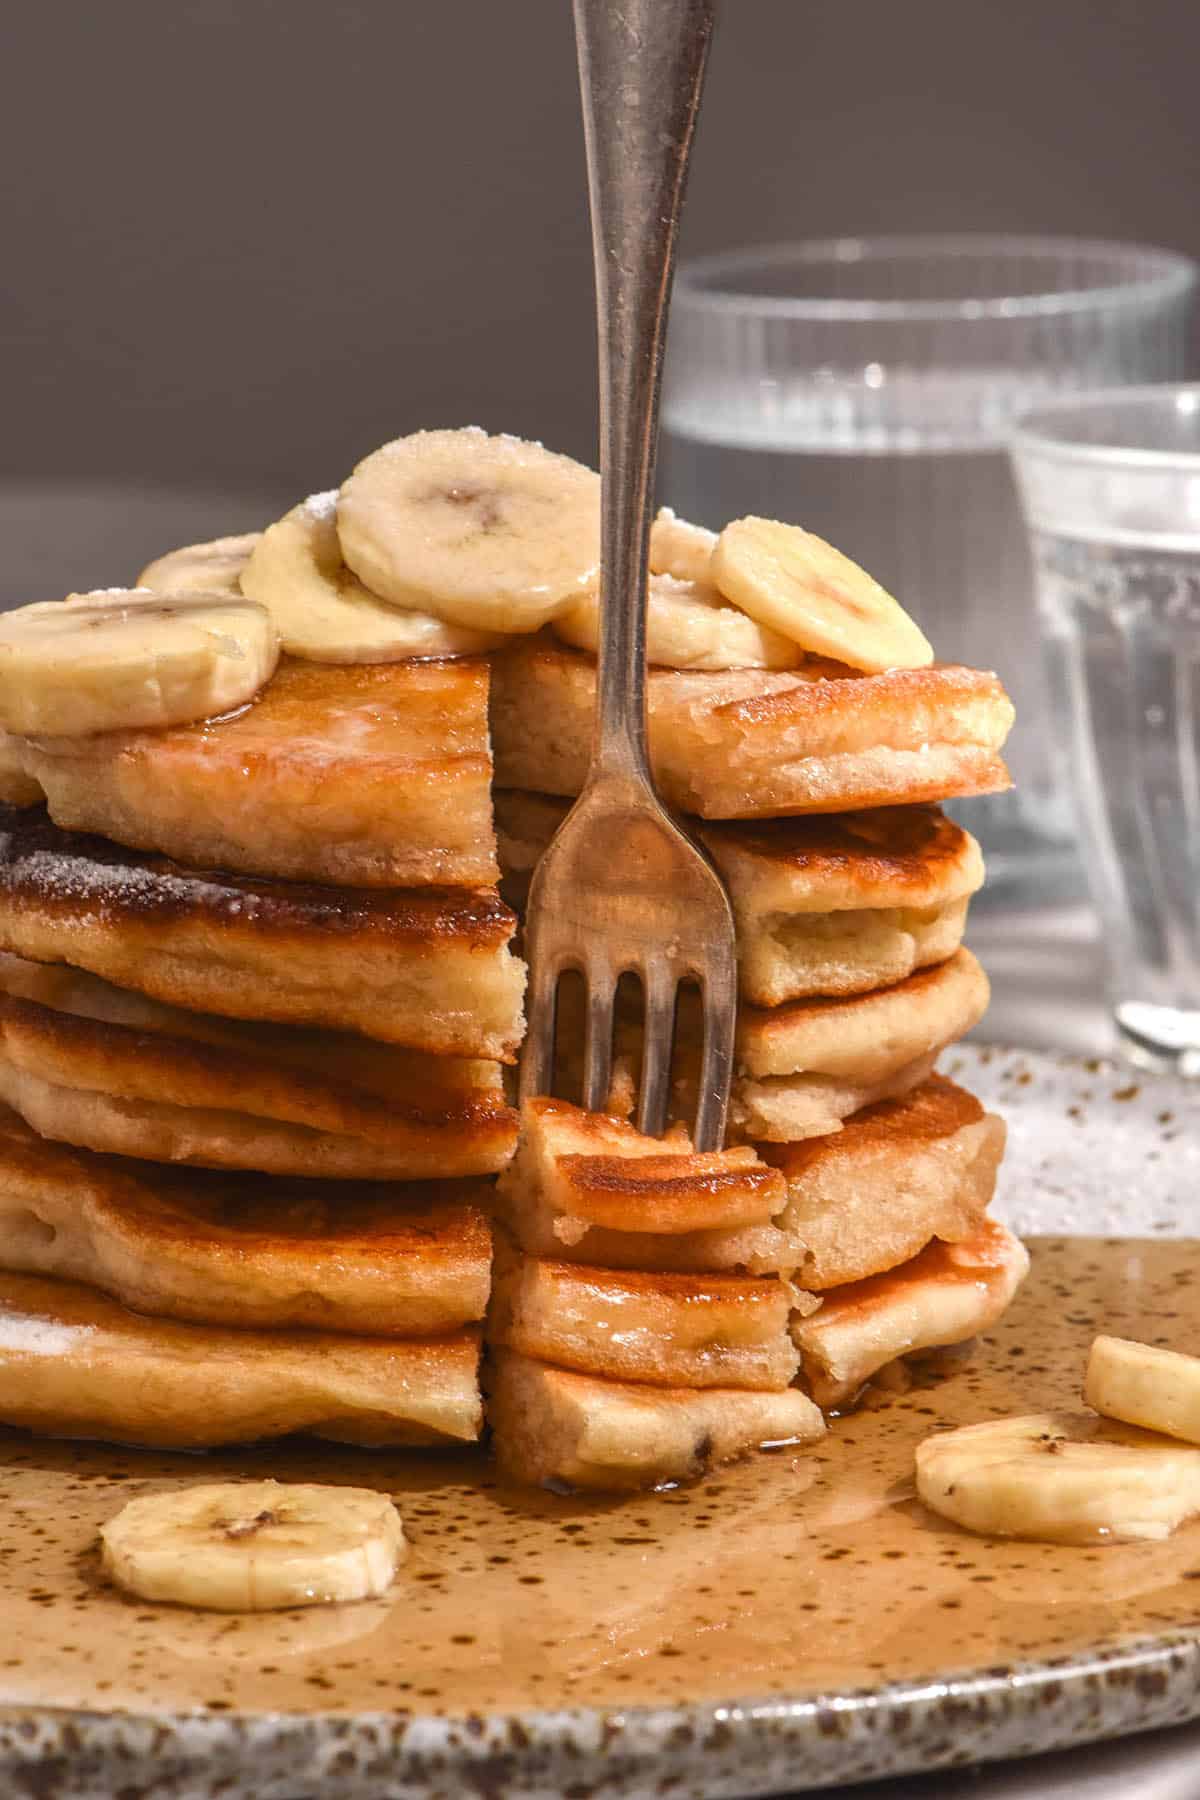 A side on view of a stack of gluten free banana pancakes that have been topped with banana slices and lots of maple syrup. A slice has been made into the stack in the front and a front stands upright in the pieces.